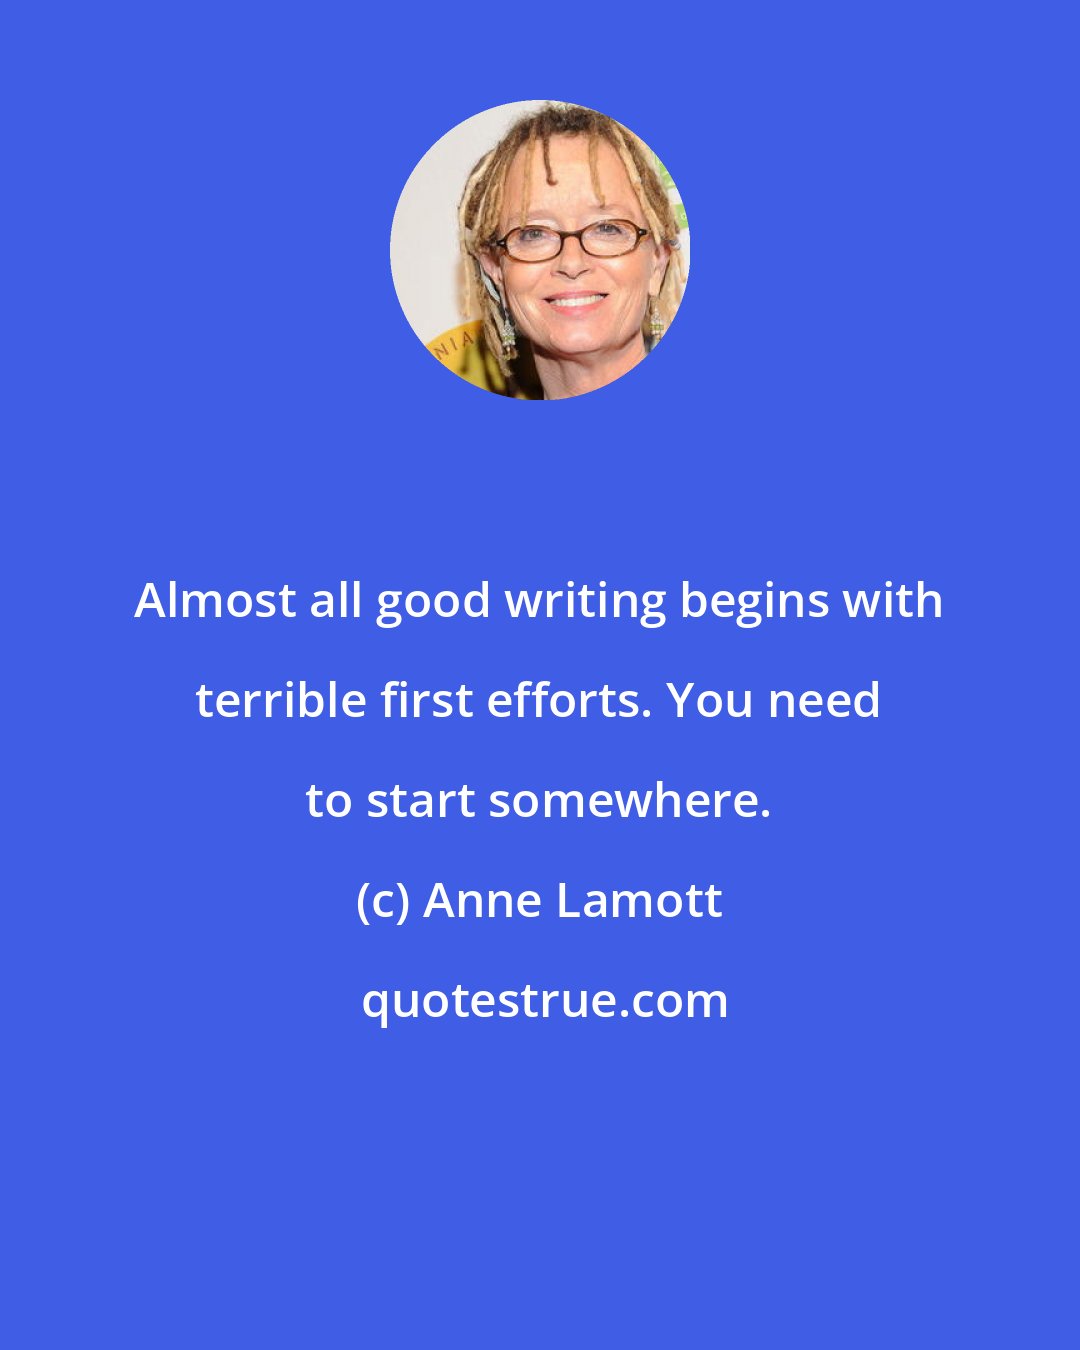 Anne Lamott: Almost all good writing begins with terrible first efforts. You need to start somewhere.